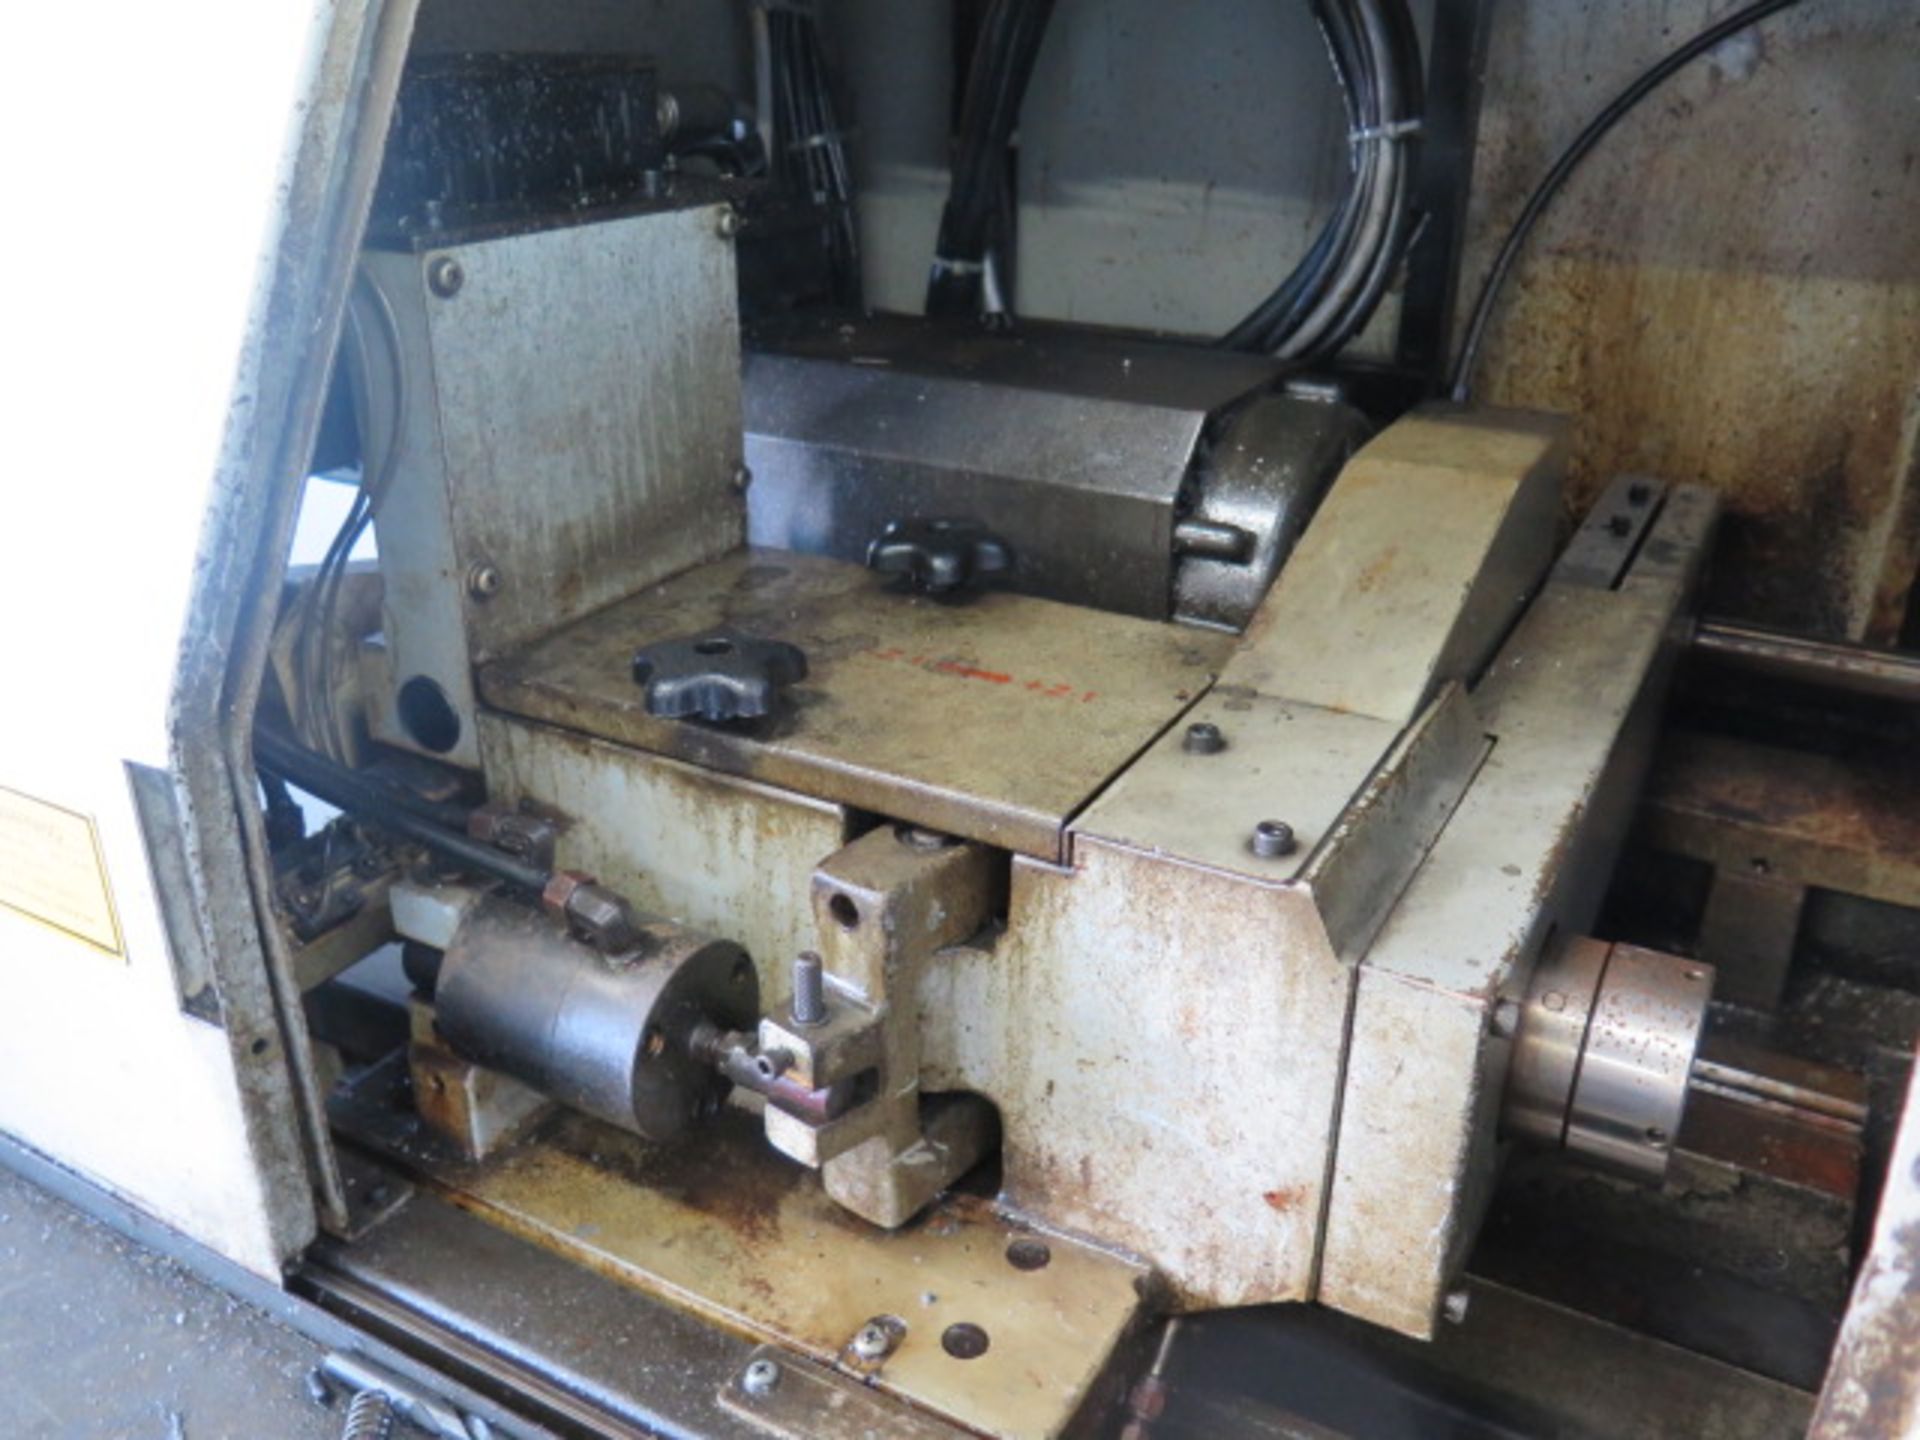 Star SV-20 CNC Swiss Type Automatic Lathe s/n 000823 w/ Fanuc Controls, Sub-Spindle, SOLD AS IS - Image 15 of 25